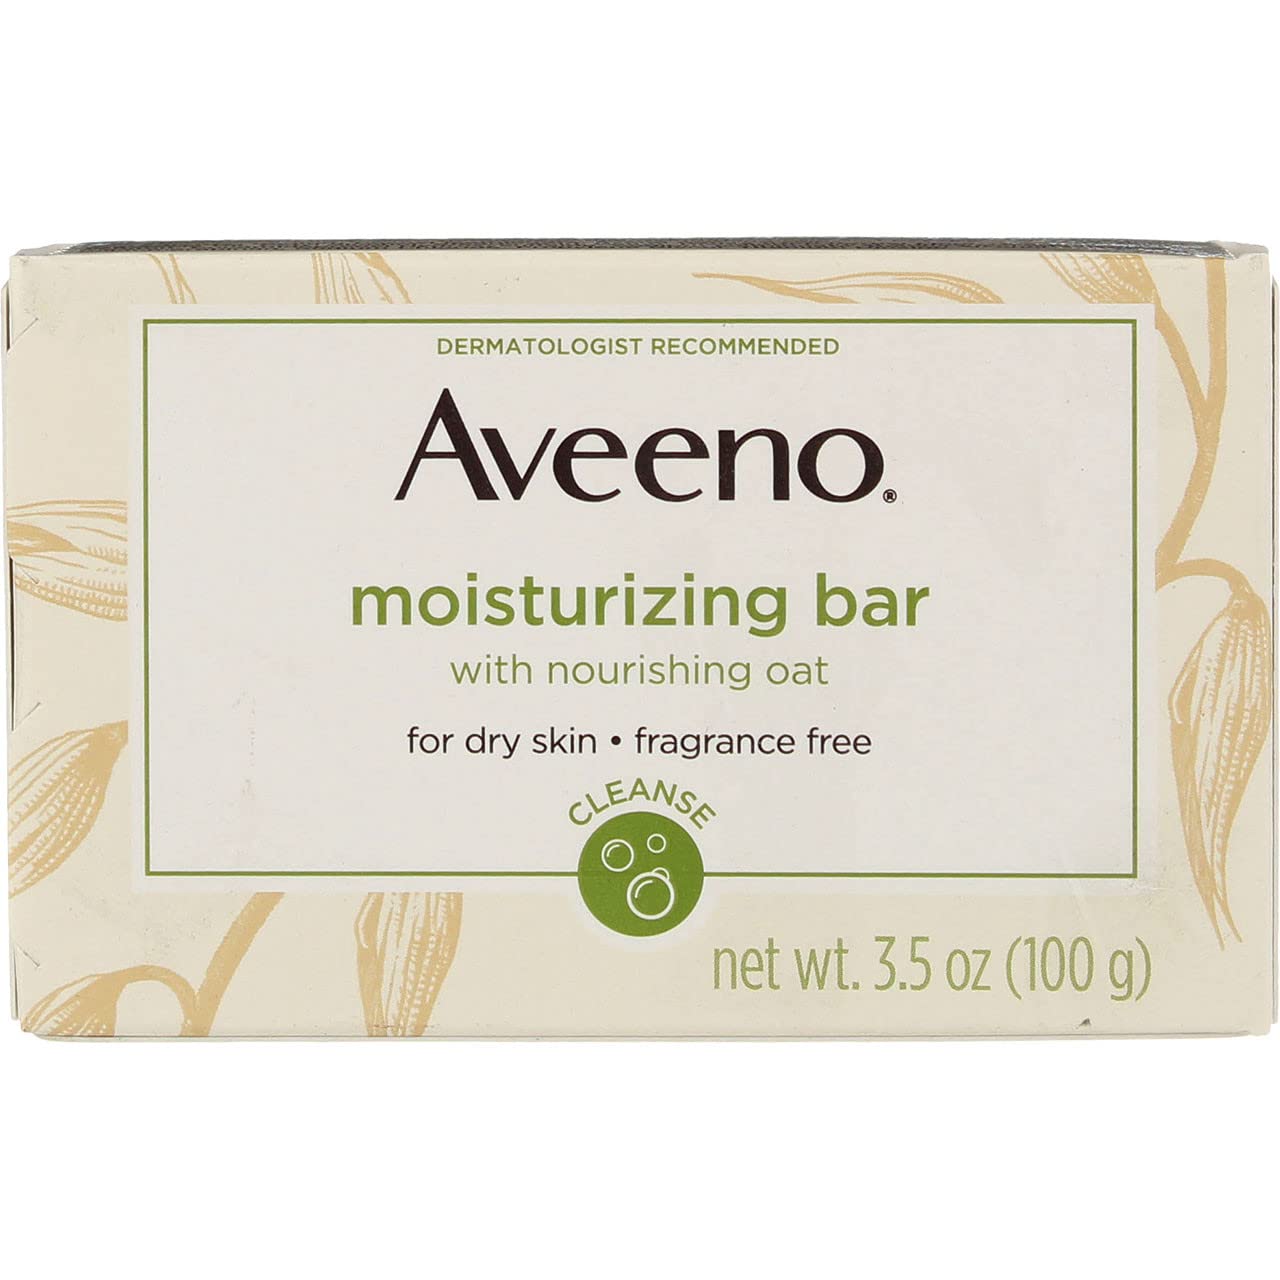 Aveeno Gentle Moisturizing Bar Facial Cleanser with Nourishing Oat for Dry Skin, Fragrance-free, Dye-Free, & Soap-Free, 3.5 oz (